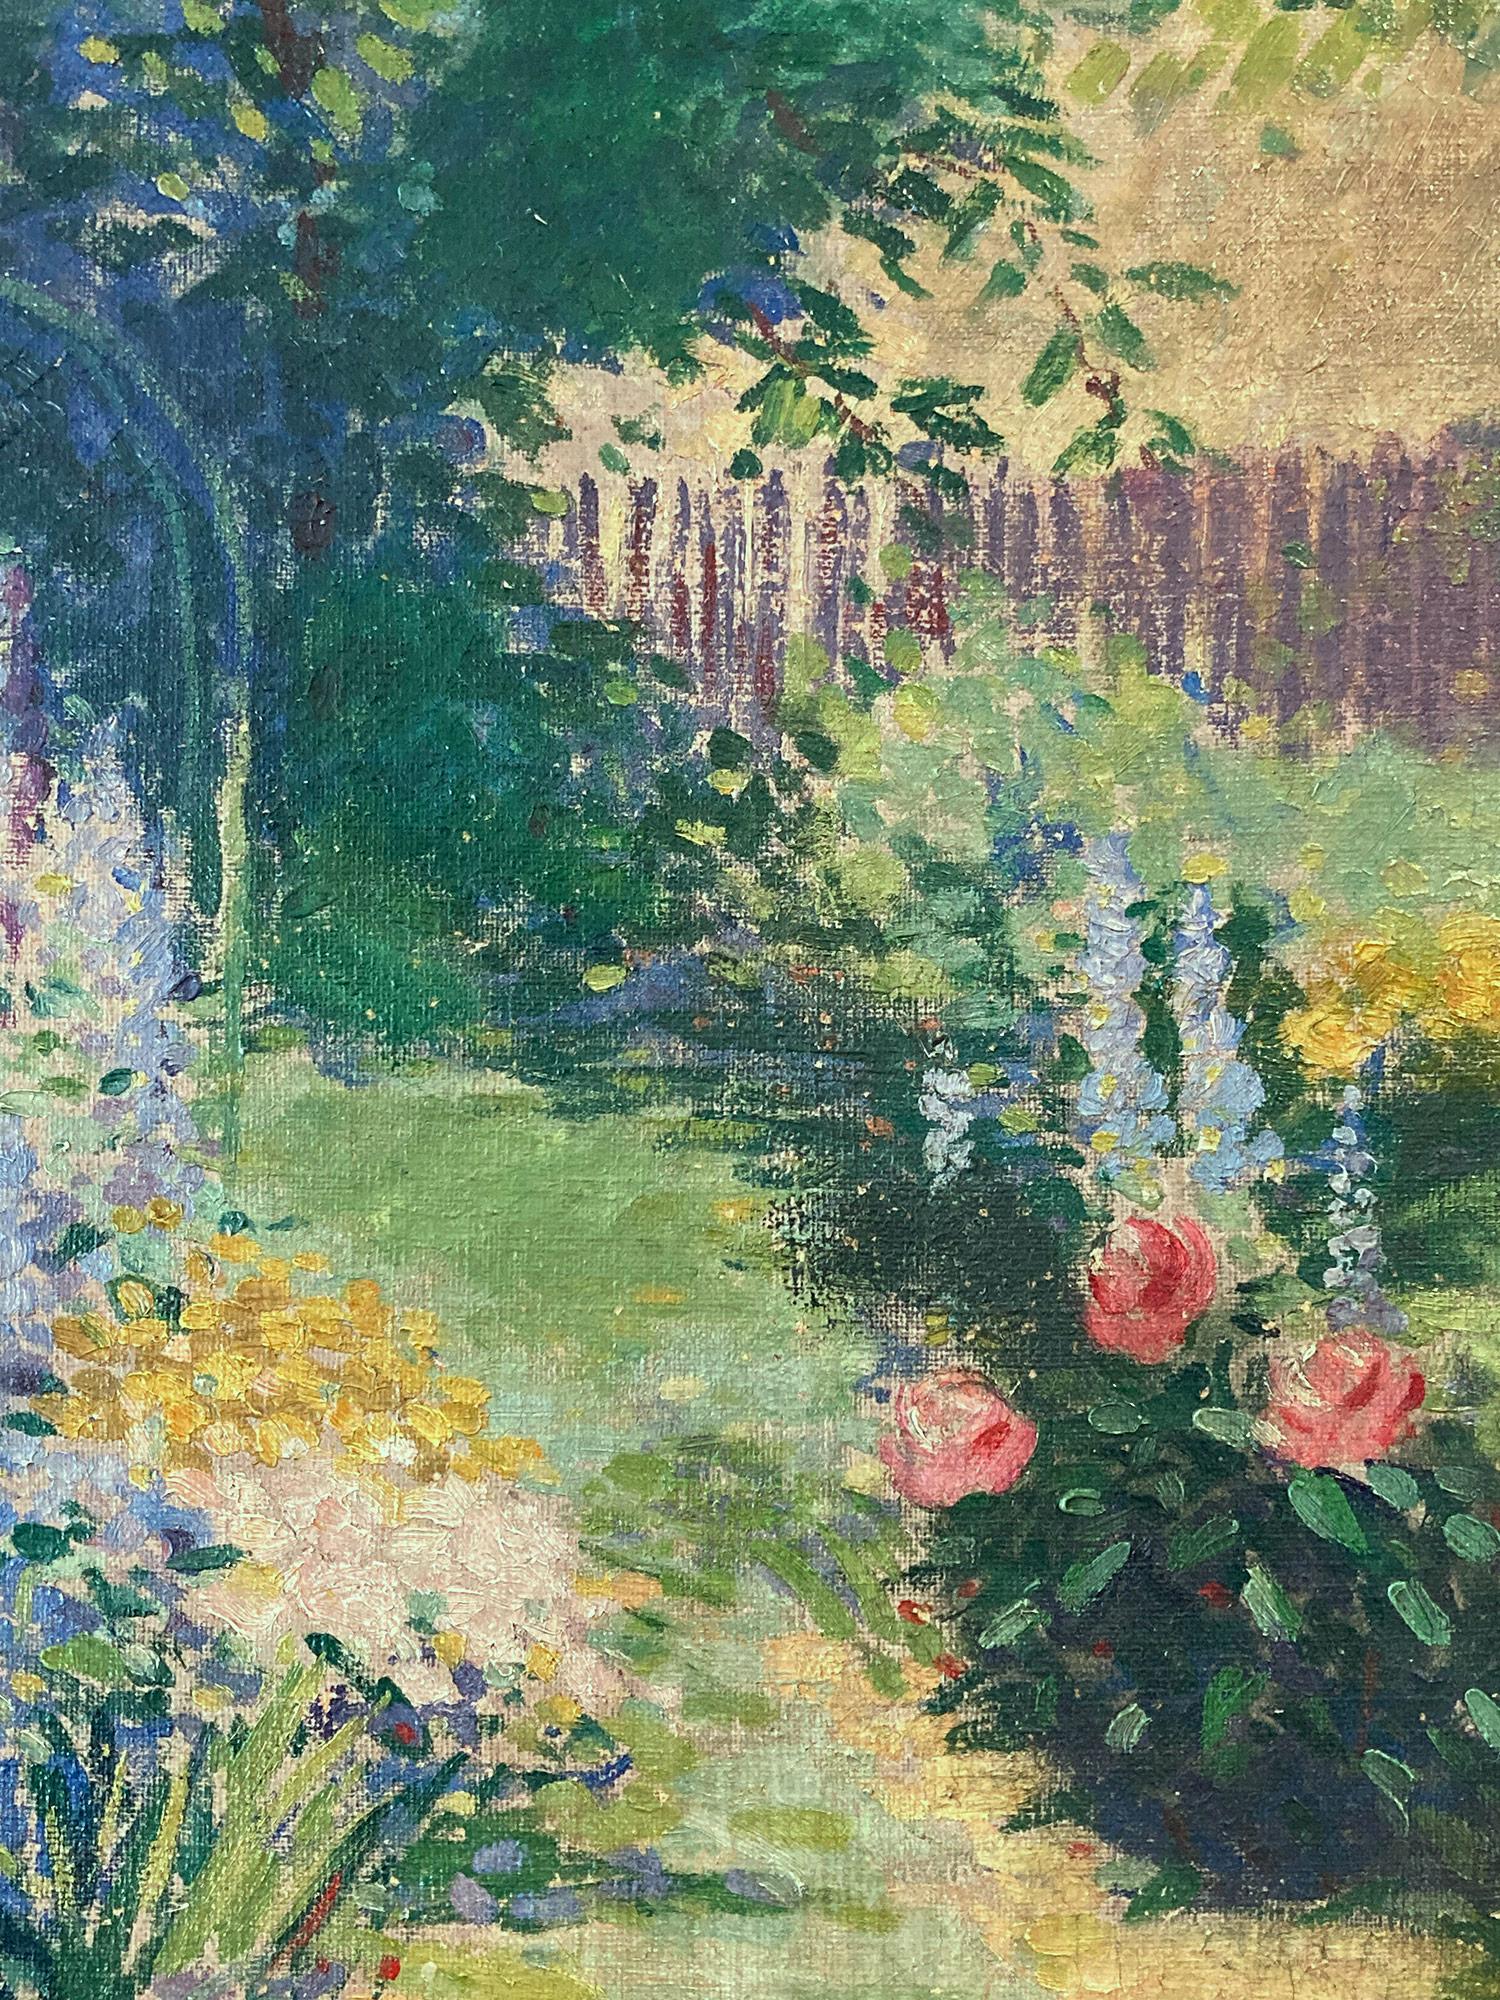 This piece is a pertinent example of Helen Butman most sought after works, depicting a Garden view with flowers by the water.  As an American Impressionist artist, most of Butman's works were produced in the Early 20th Century, between 1900- 1920,